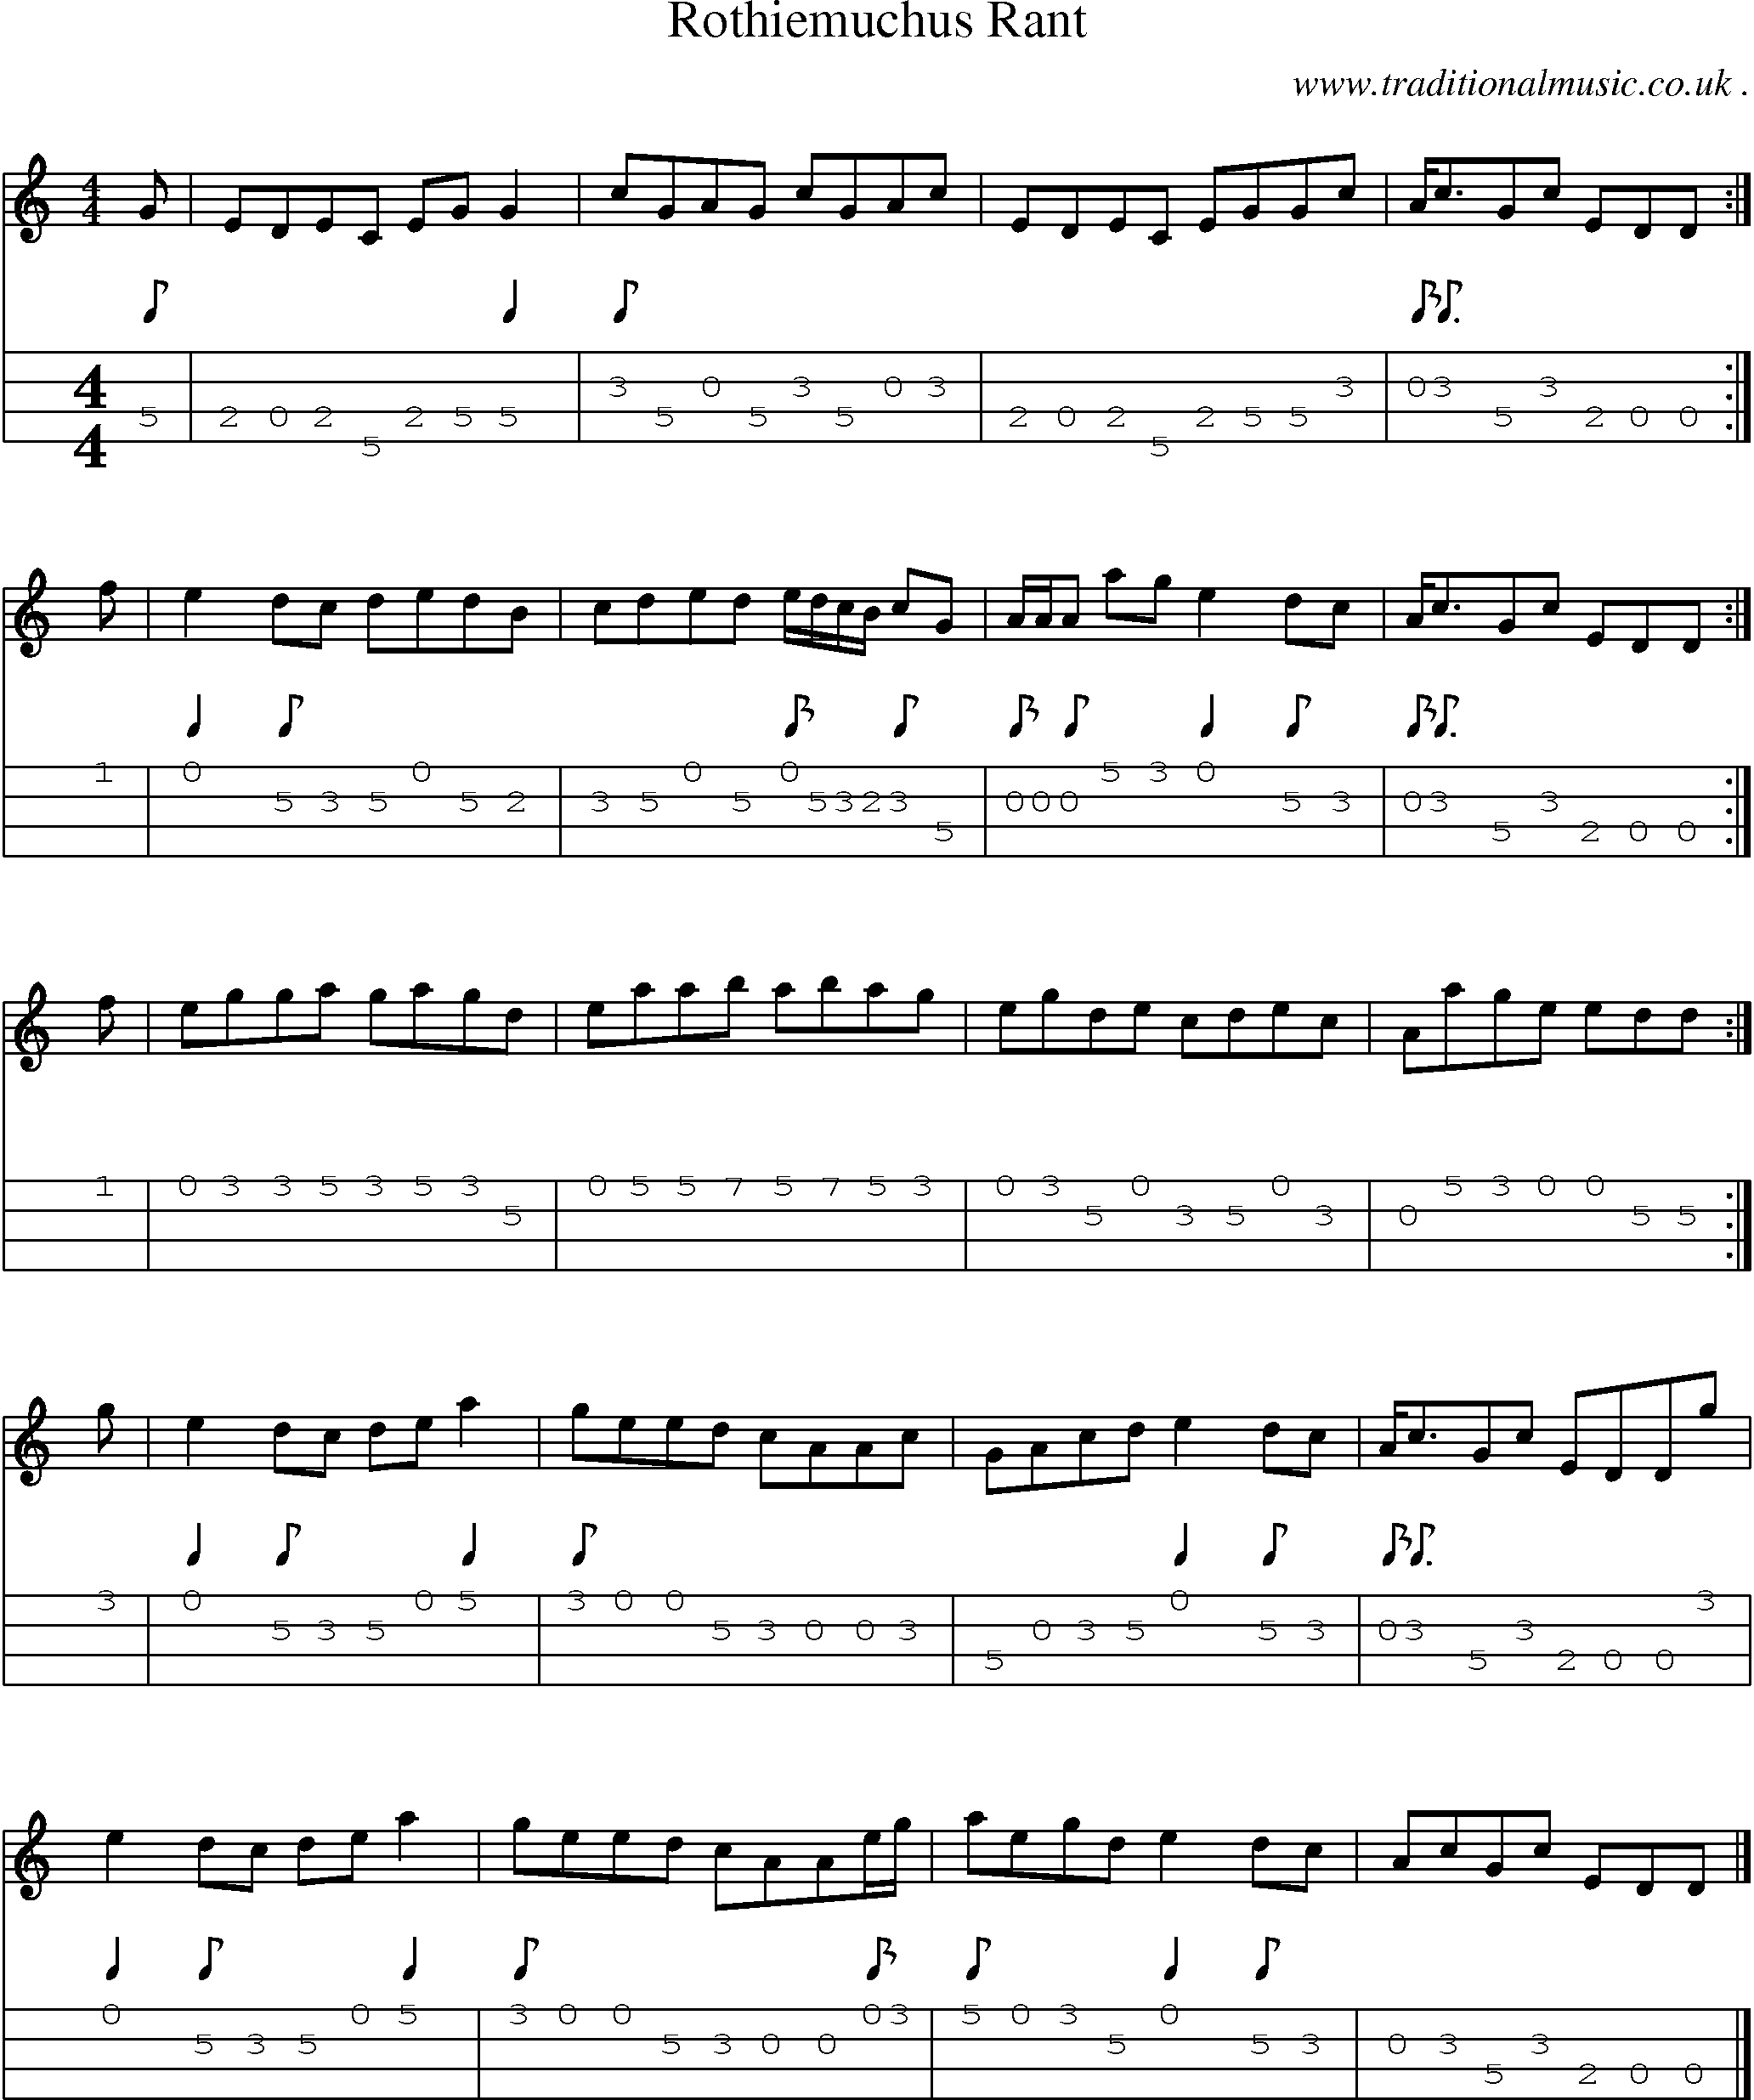 Sheet-music  score, Chords and Mandolin Tabs for Rothiemuchus Rant